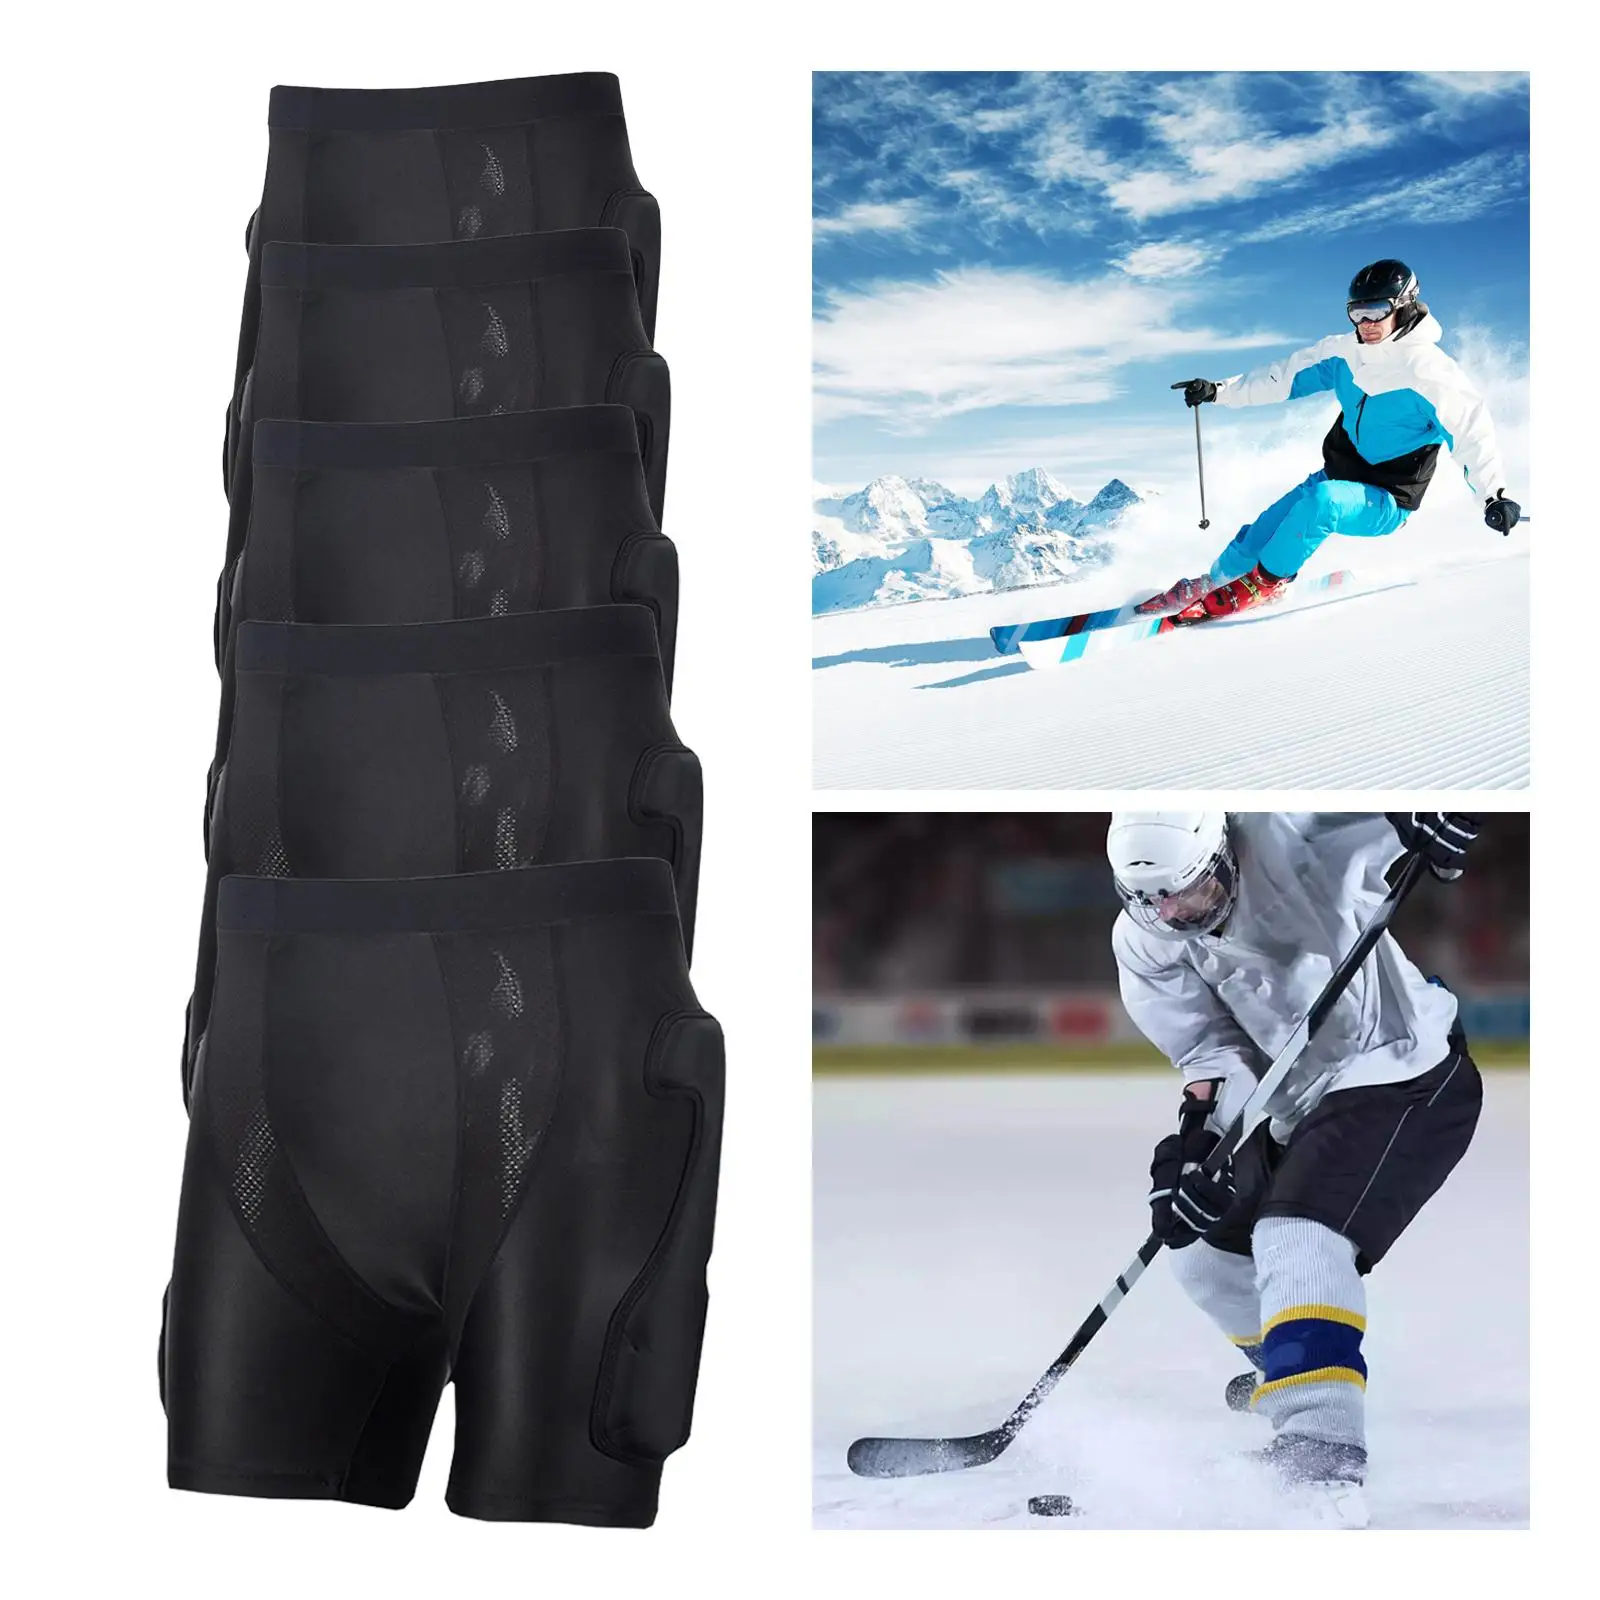 Protective Padded Shorts Skid Hip Pad Multifunction 3D Impact Pad for Ski Snowboarding Skateboard Outdoor Sports Roller Skating